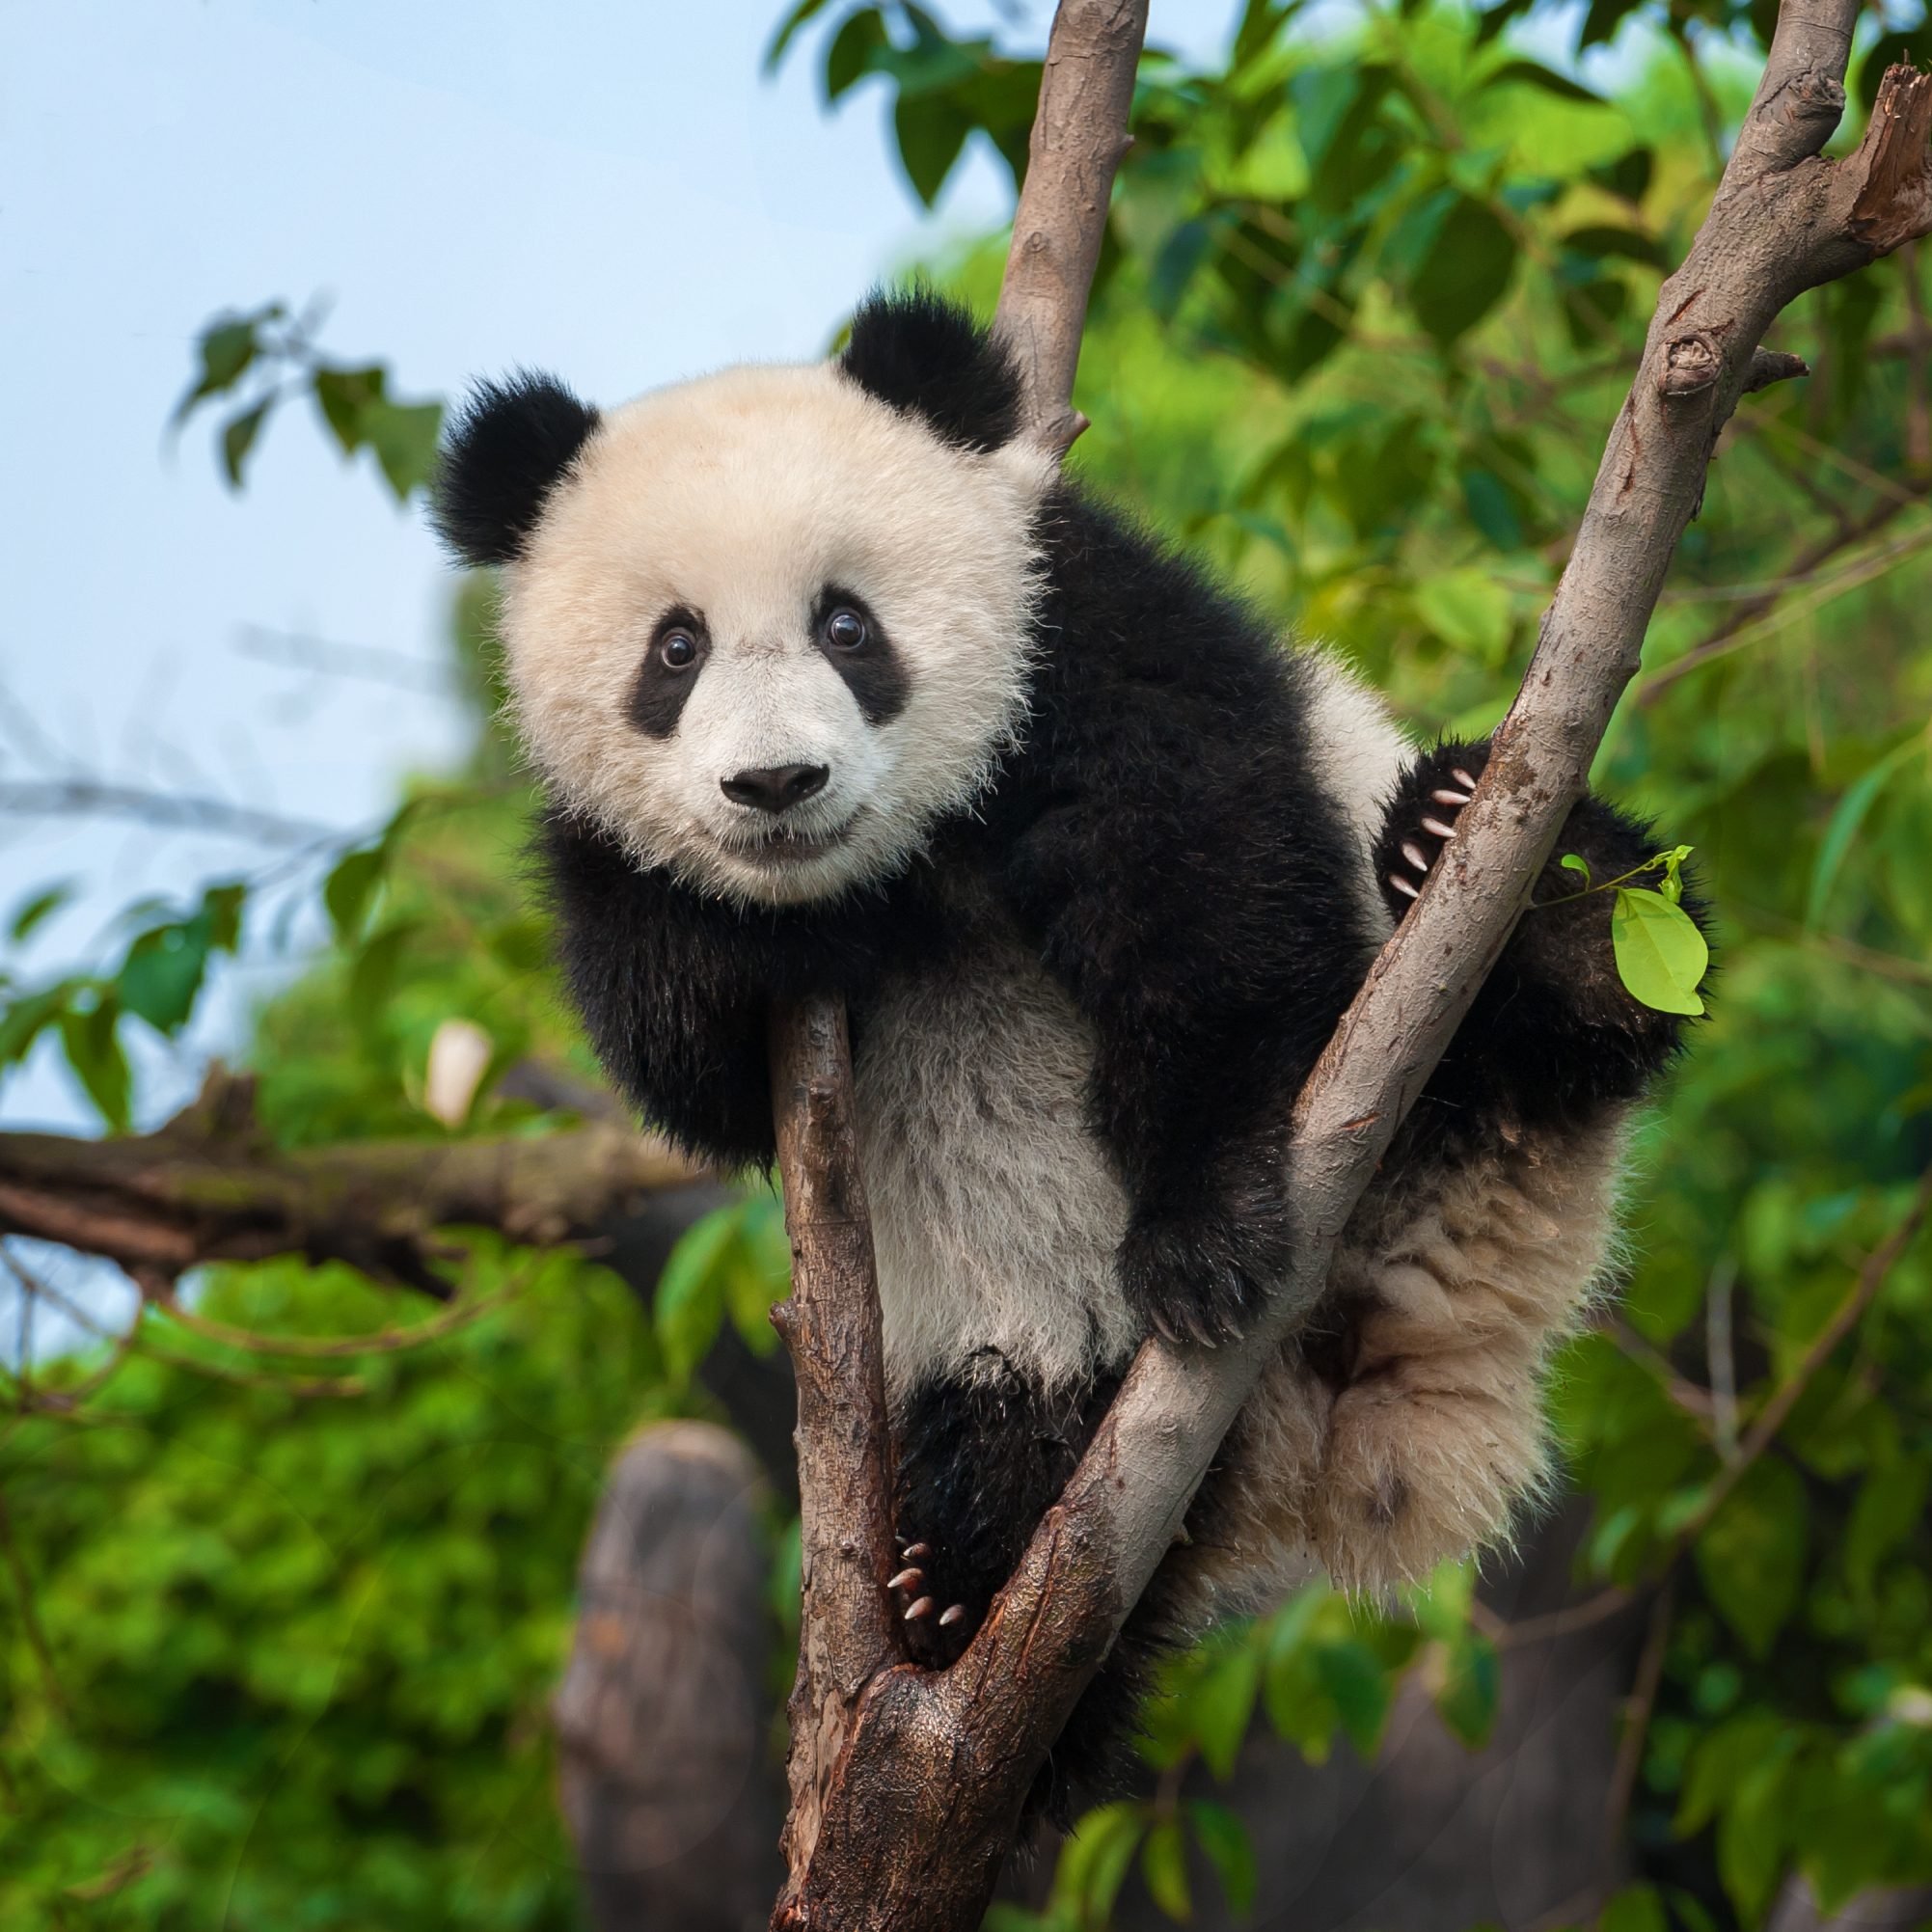 How many giant pandas are there in the world 2020?